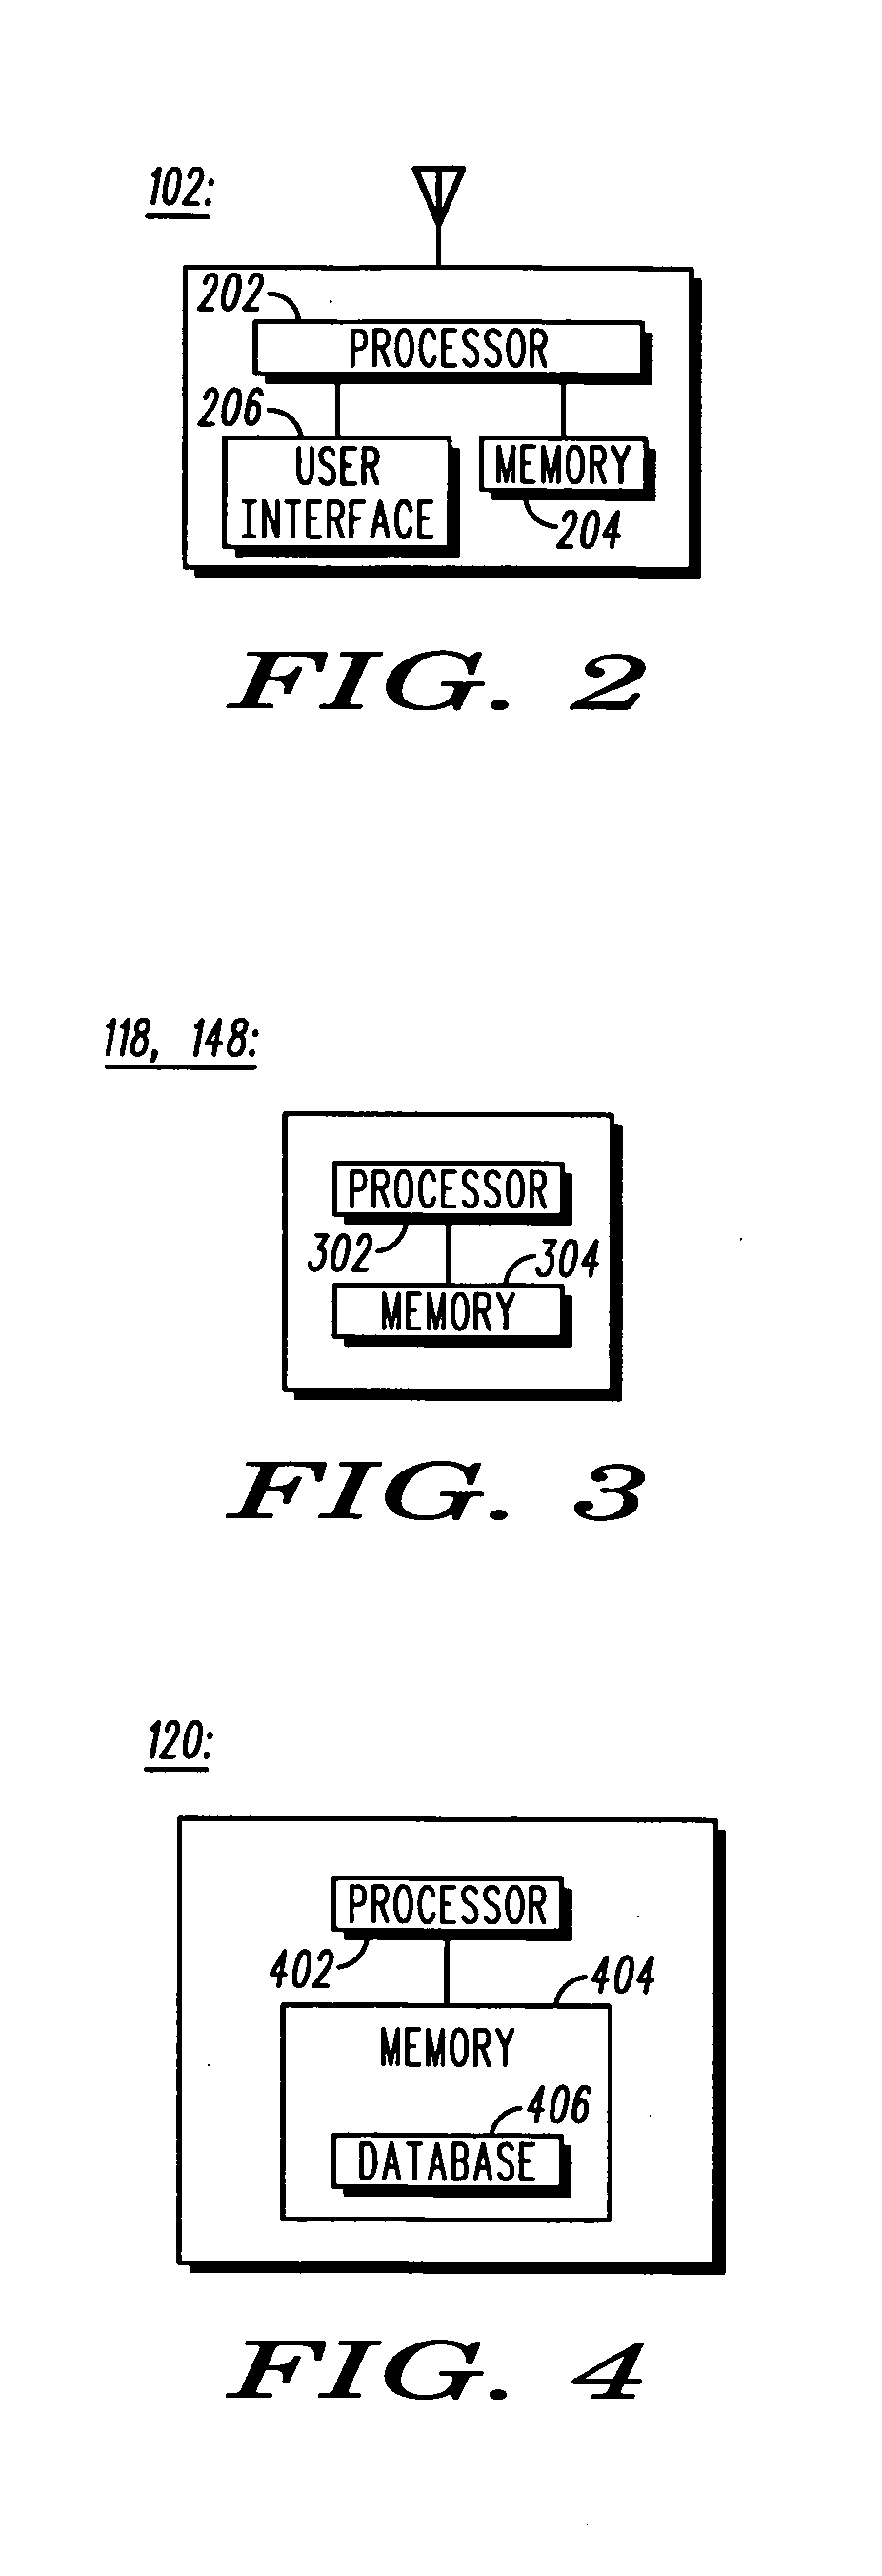 Method and apparatus for providing a multimedia broadcast/multicast service in a visited network